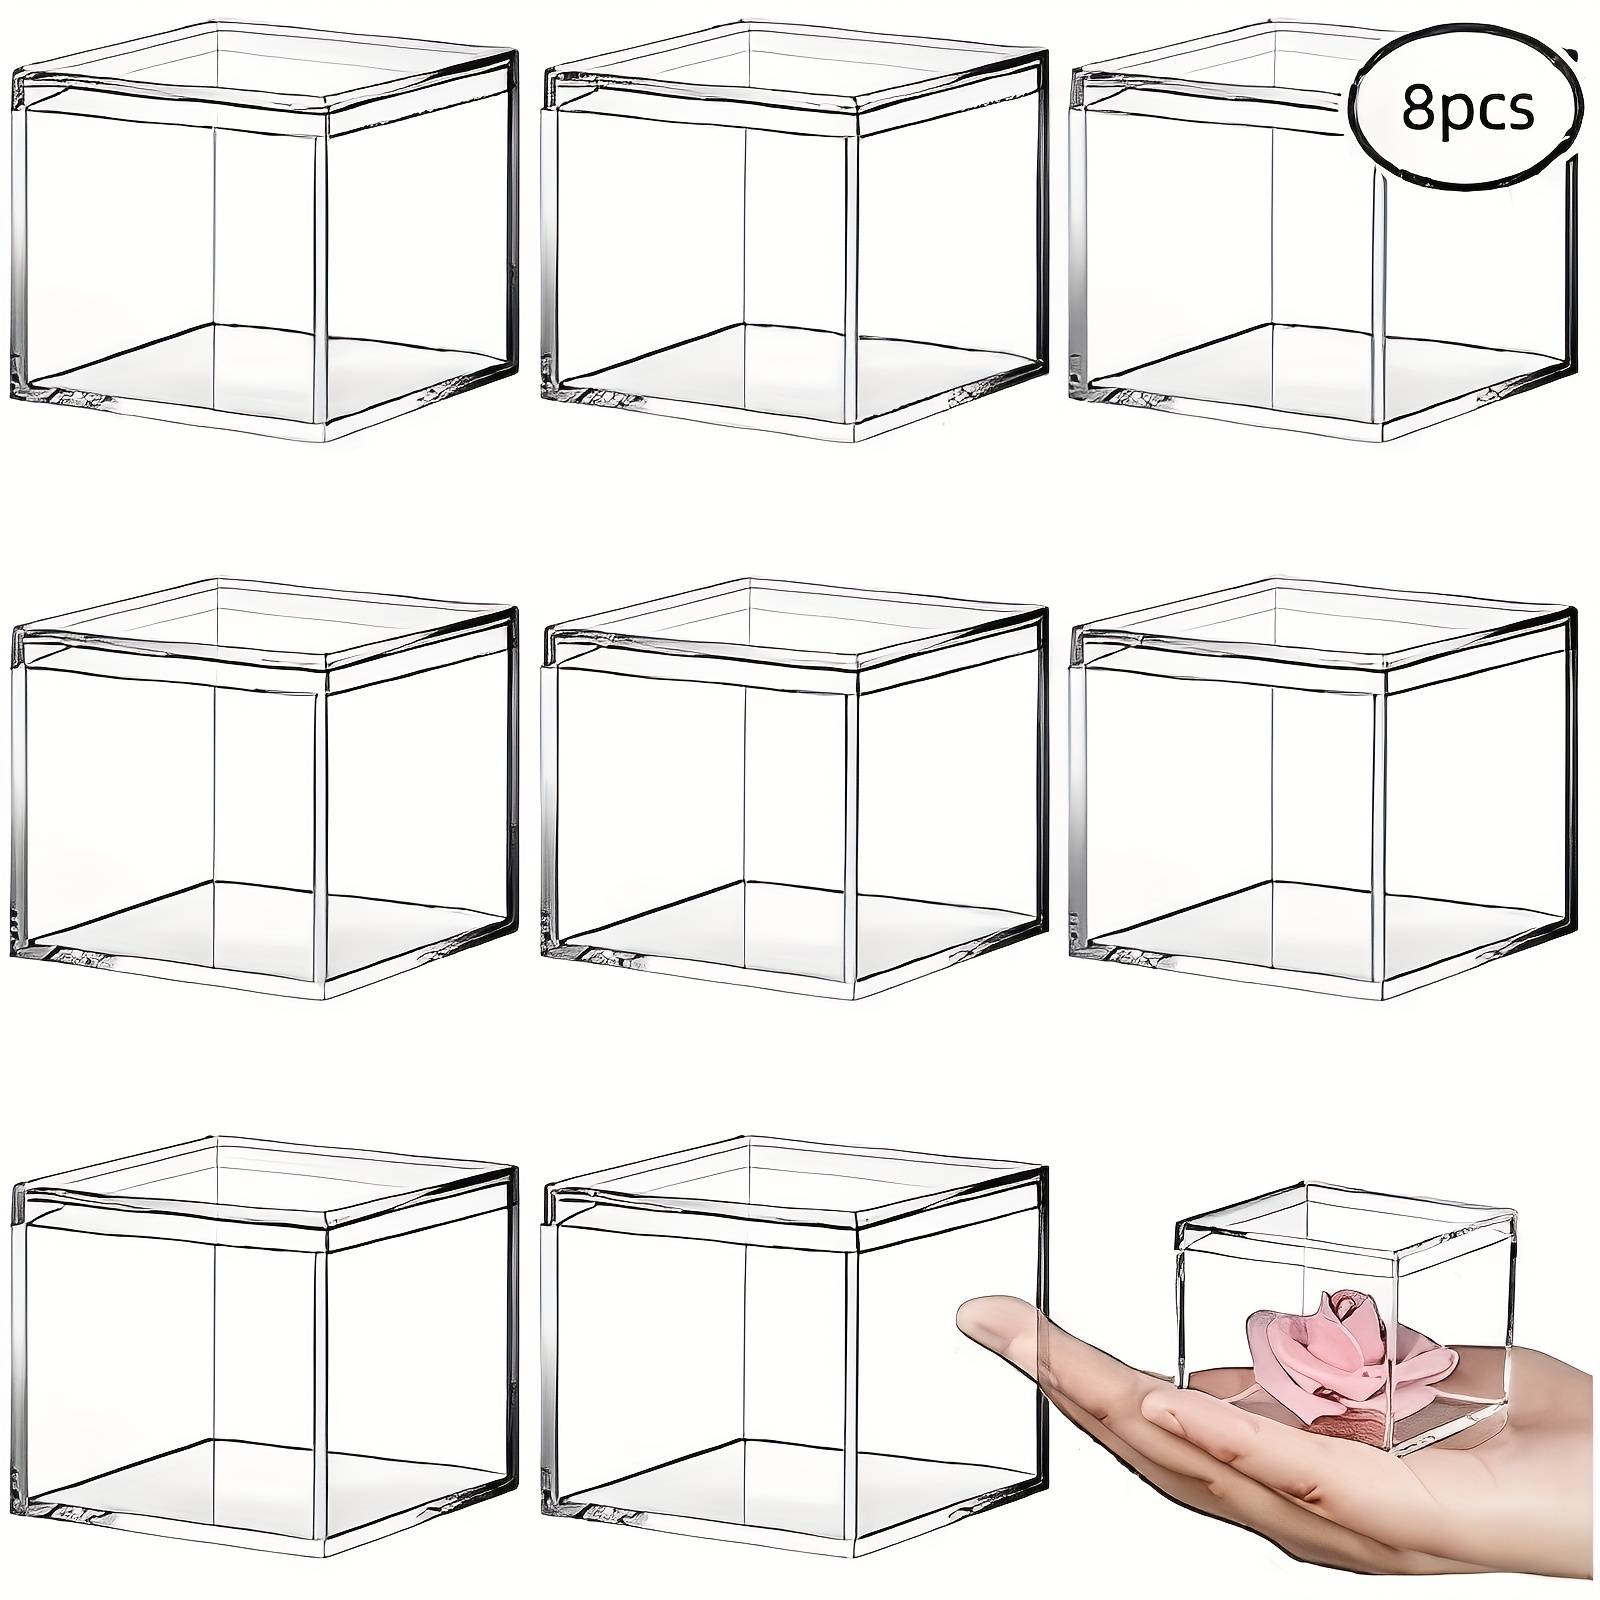 Greeting Card Storage Box with Clear Dividers $8.59 Shipped